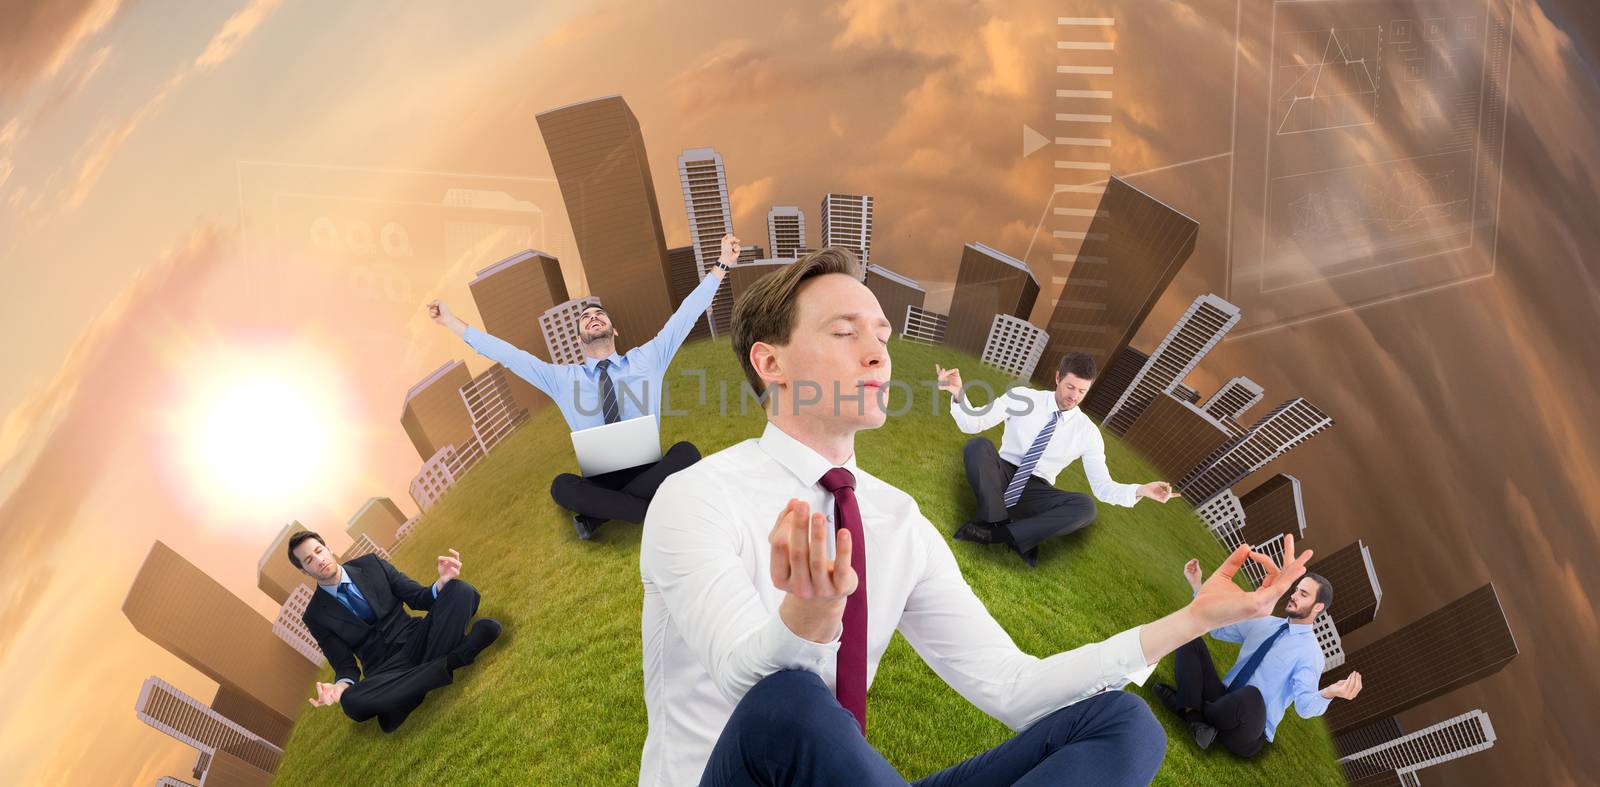  Zen businessman meditating in yoga pose against blue and orange sky with clouds Zen businessman meditating in yoga pose on white background